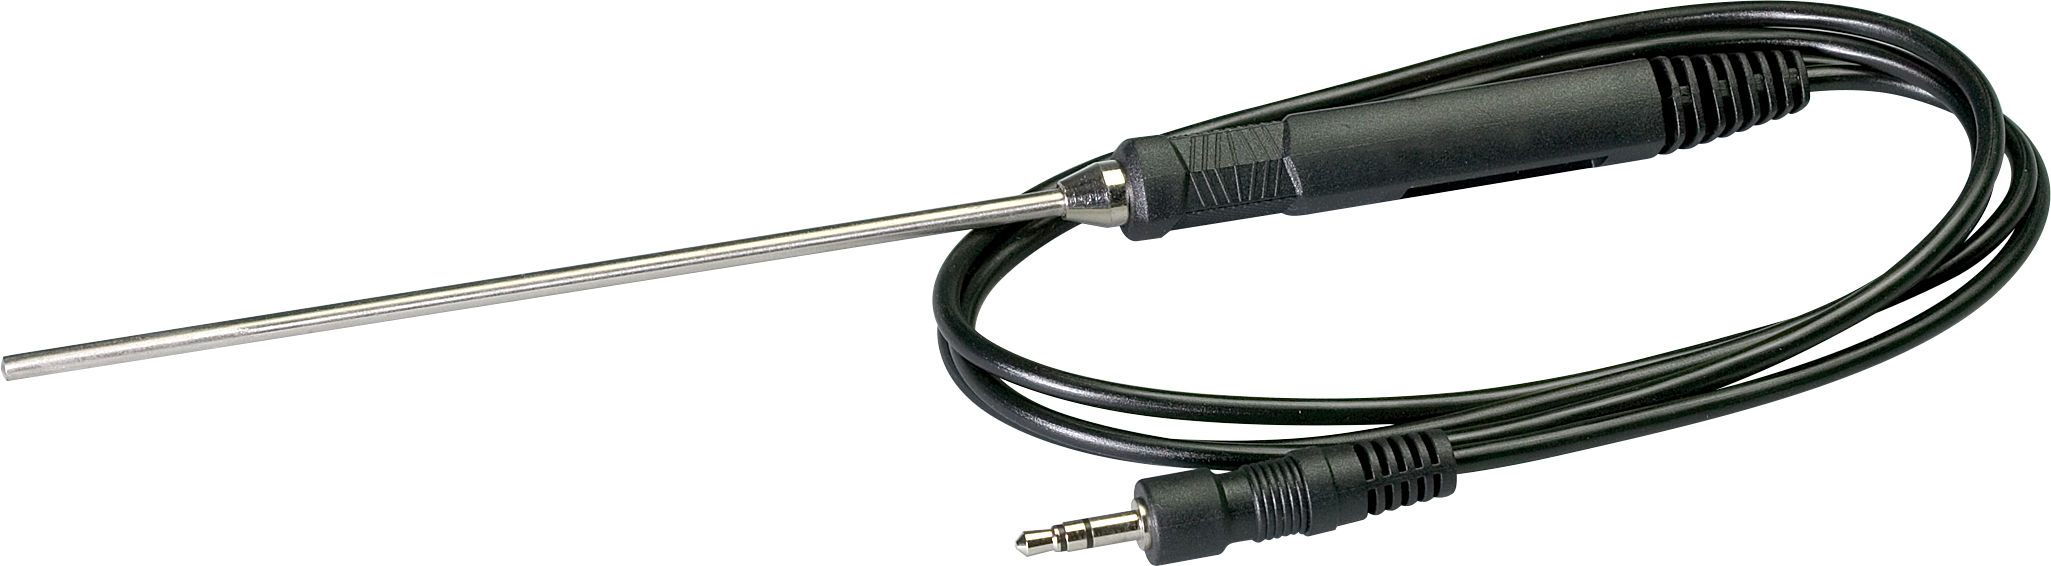 Extech TP890 Thermistor Probe -4 to 158°F (-20 to 70°C) - Calright Instruments